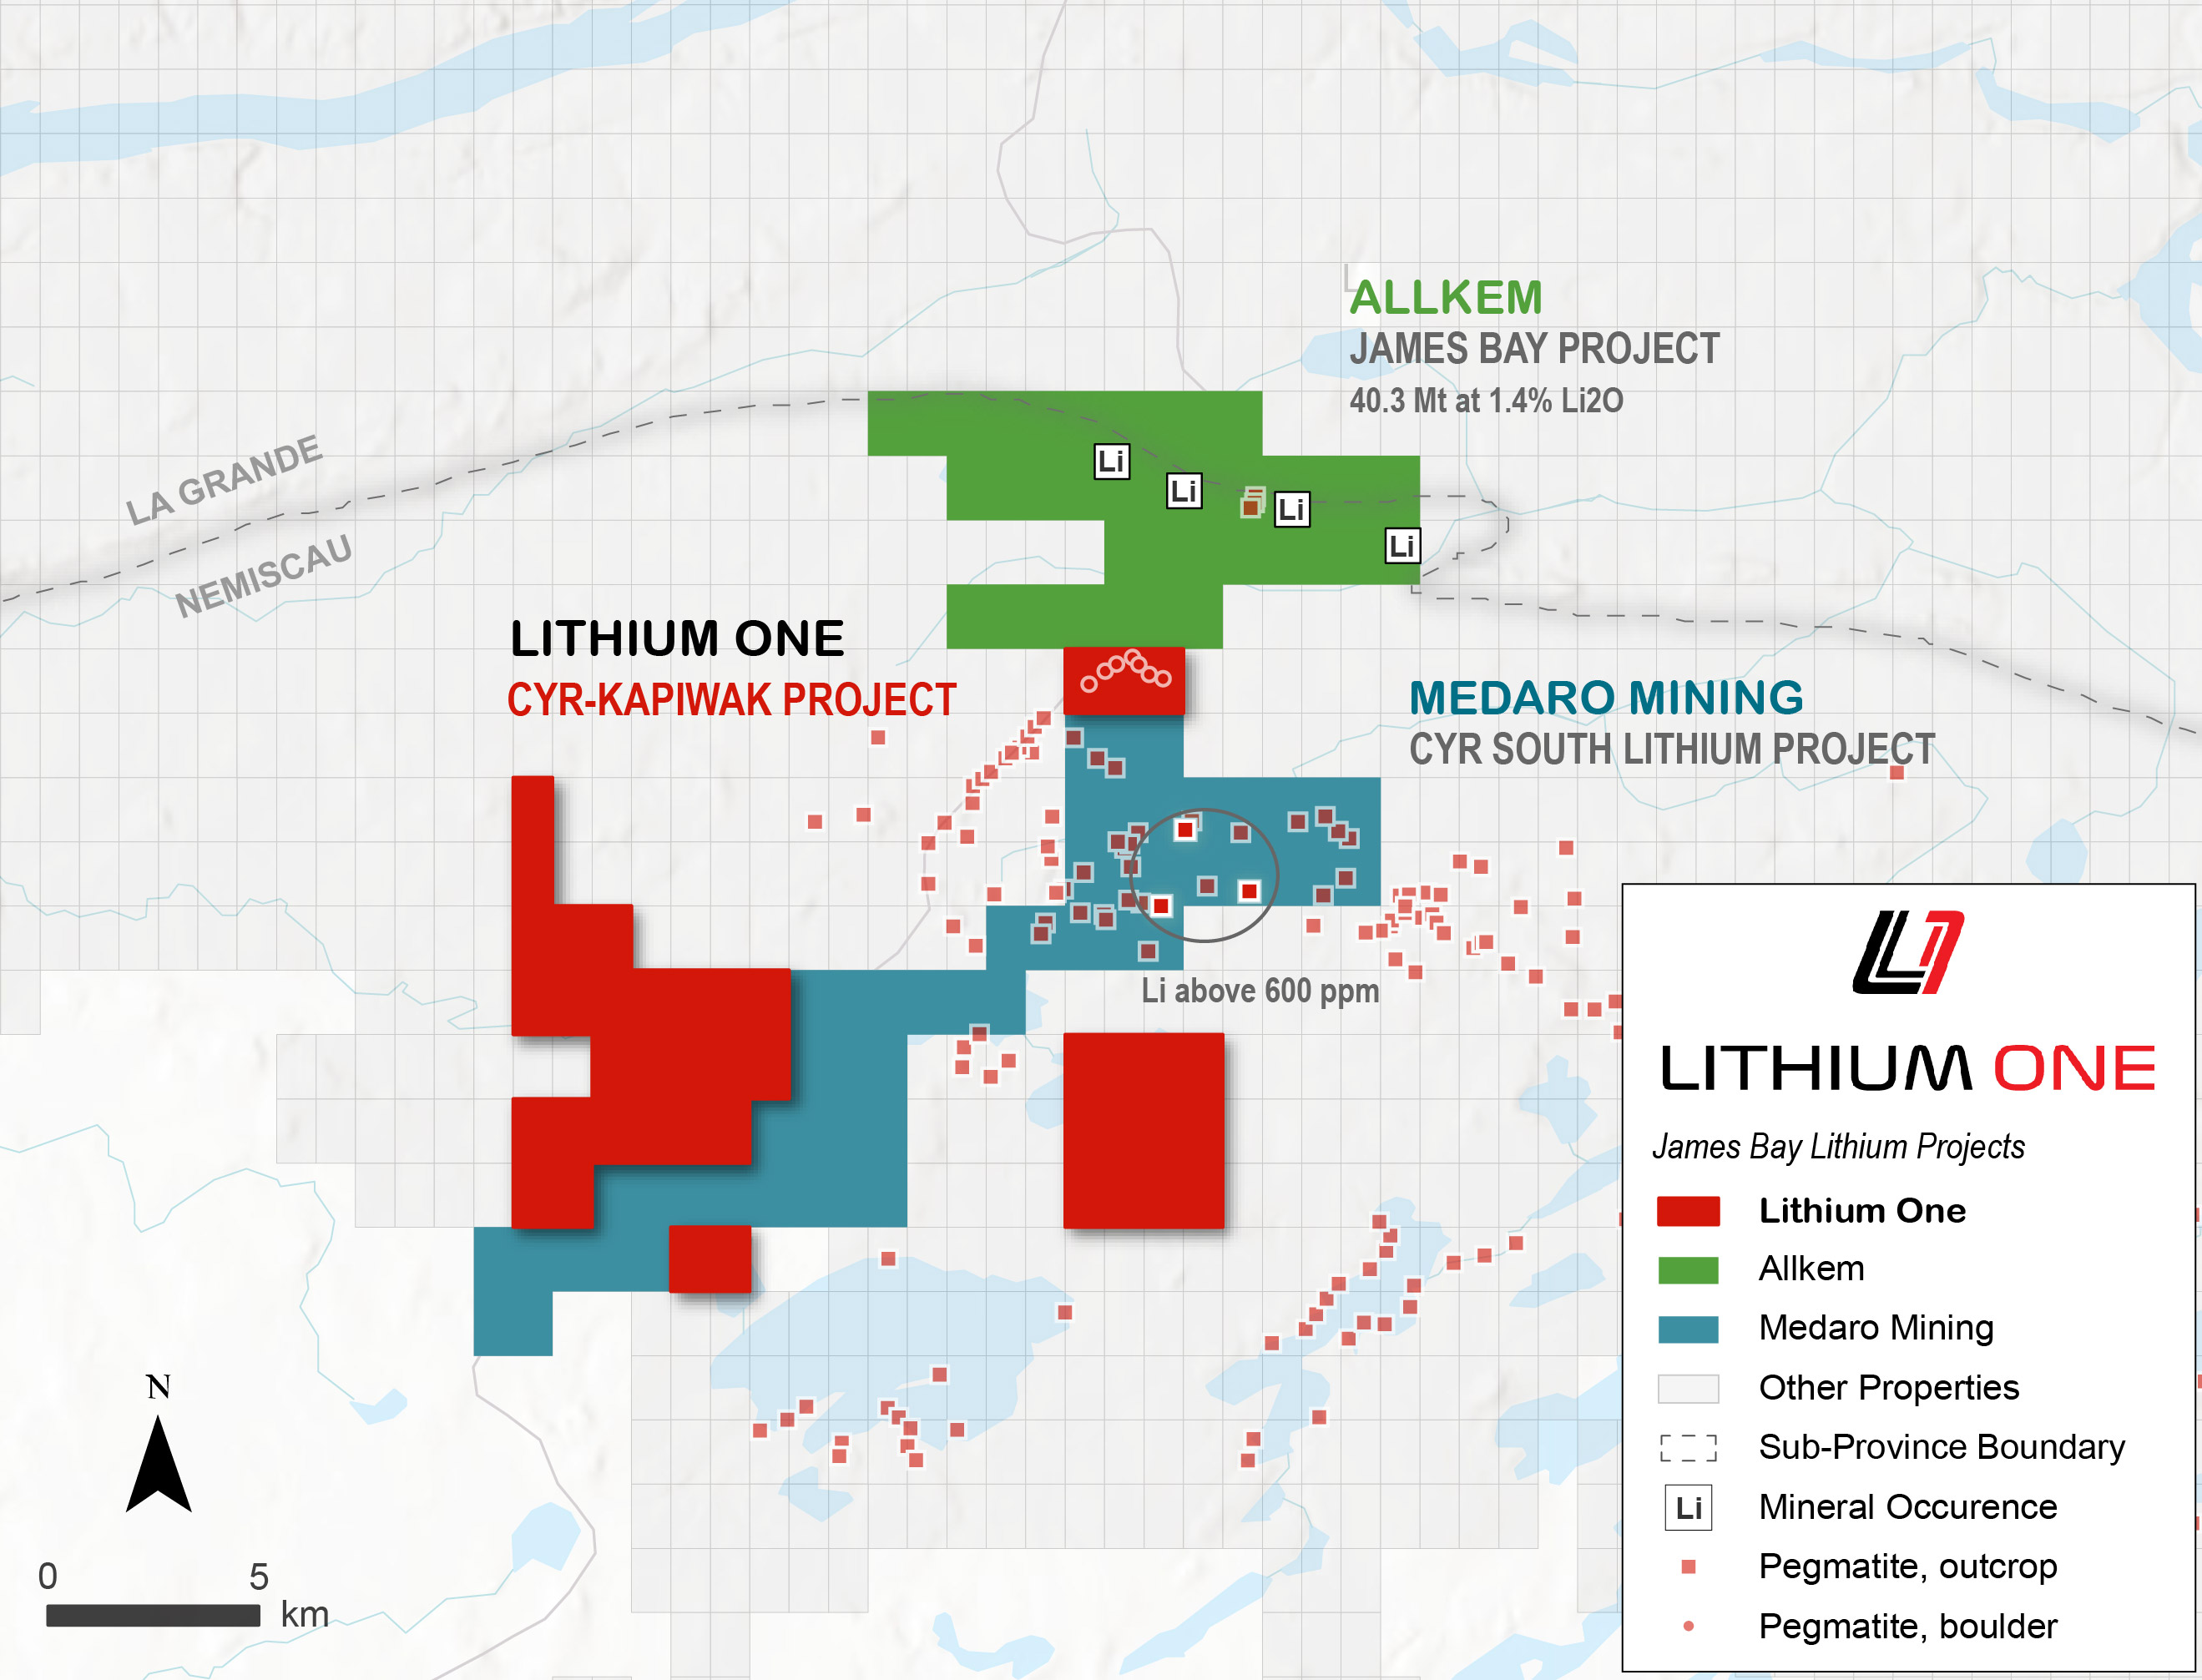 Lithium One’s Cyr-Kapiwak property with Galaxy Lithium and Medaro Mining projects in the James Bay region of Quebec.